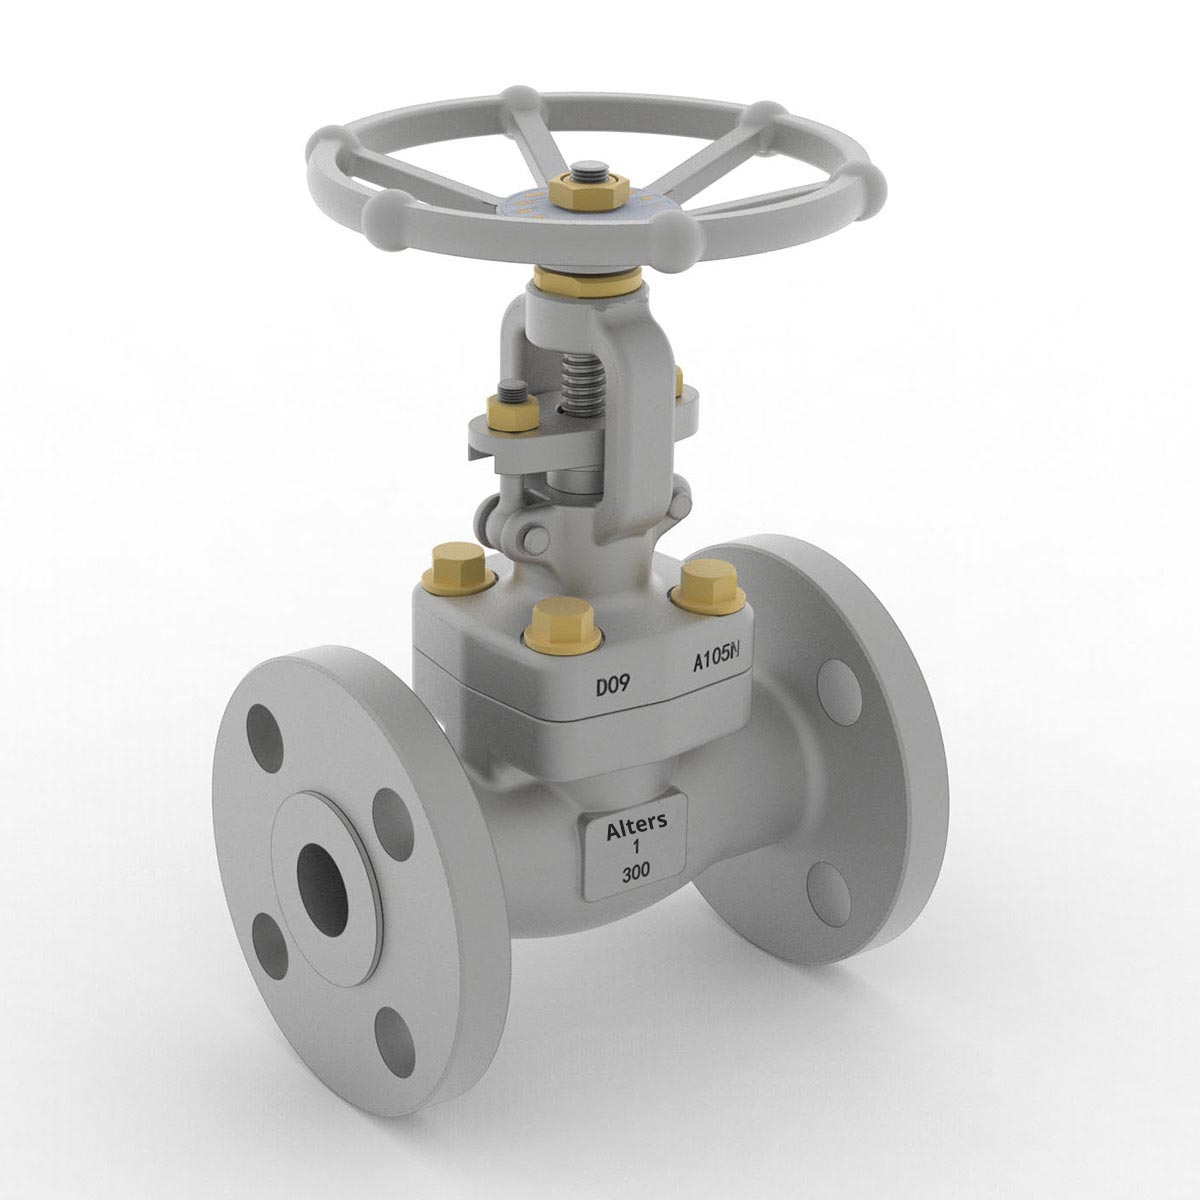 The image showcases a reliable Forged Steel Gate Valve Flange from AlterValve with the company name and specifications, used to control the flow of fluids in piping systems.